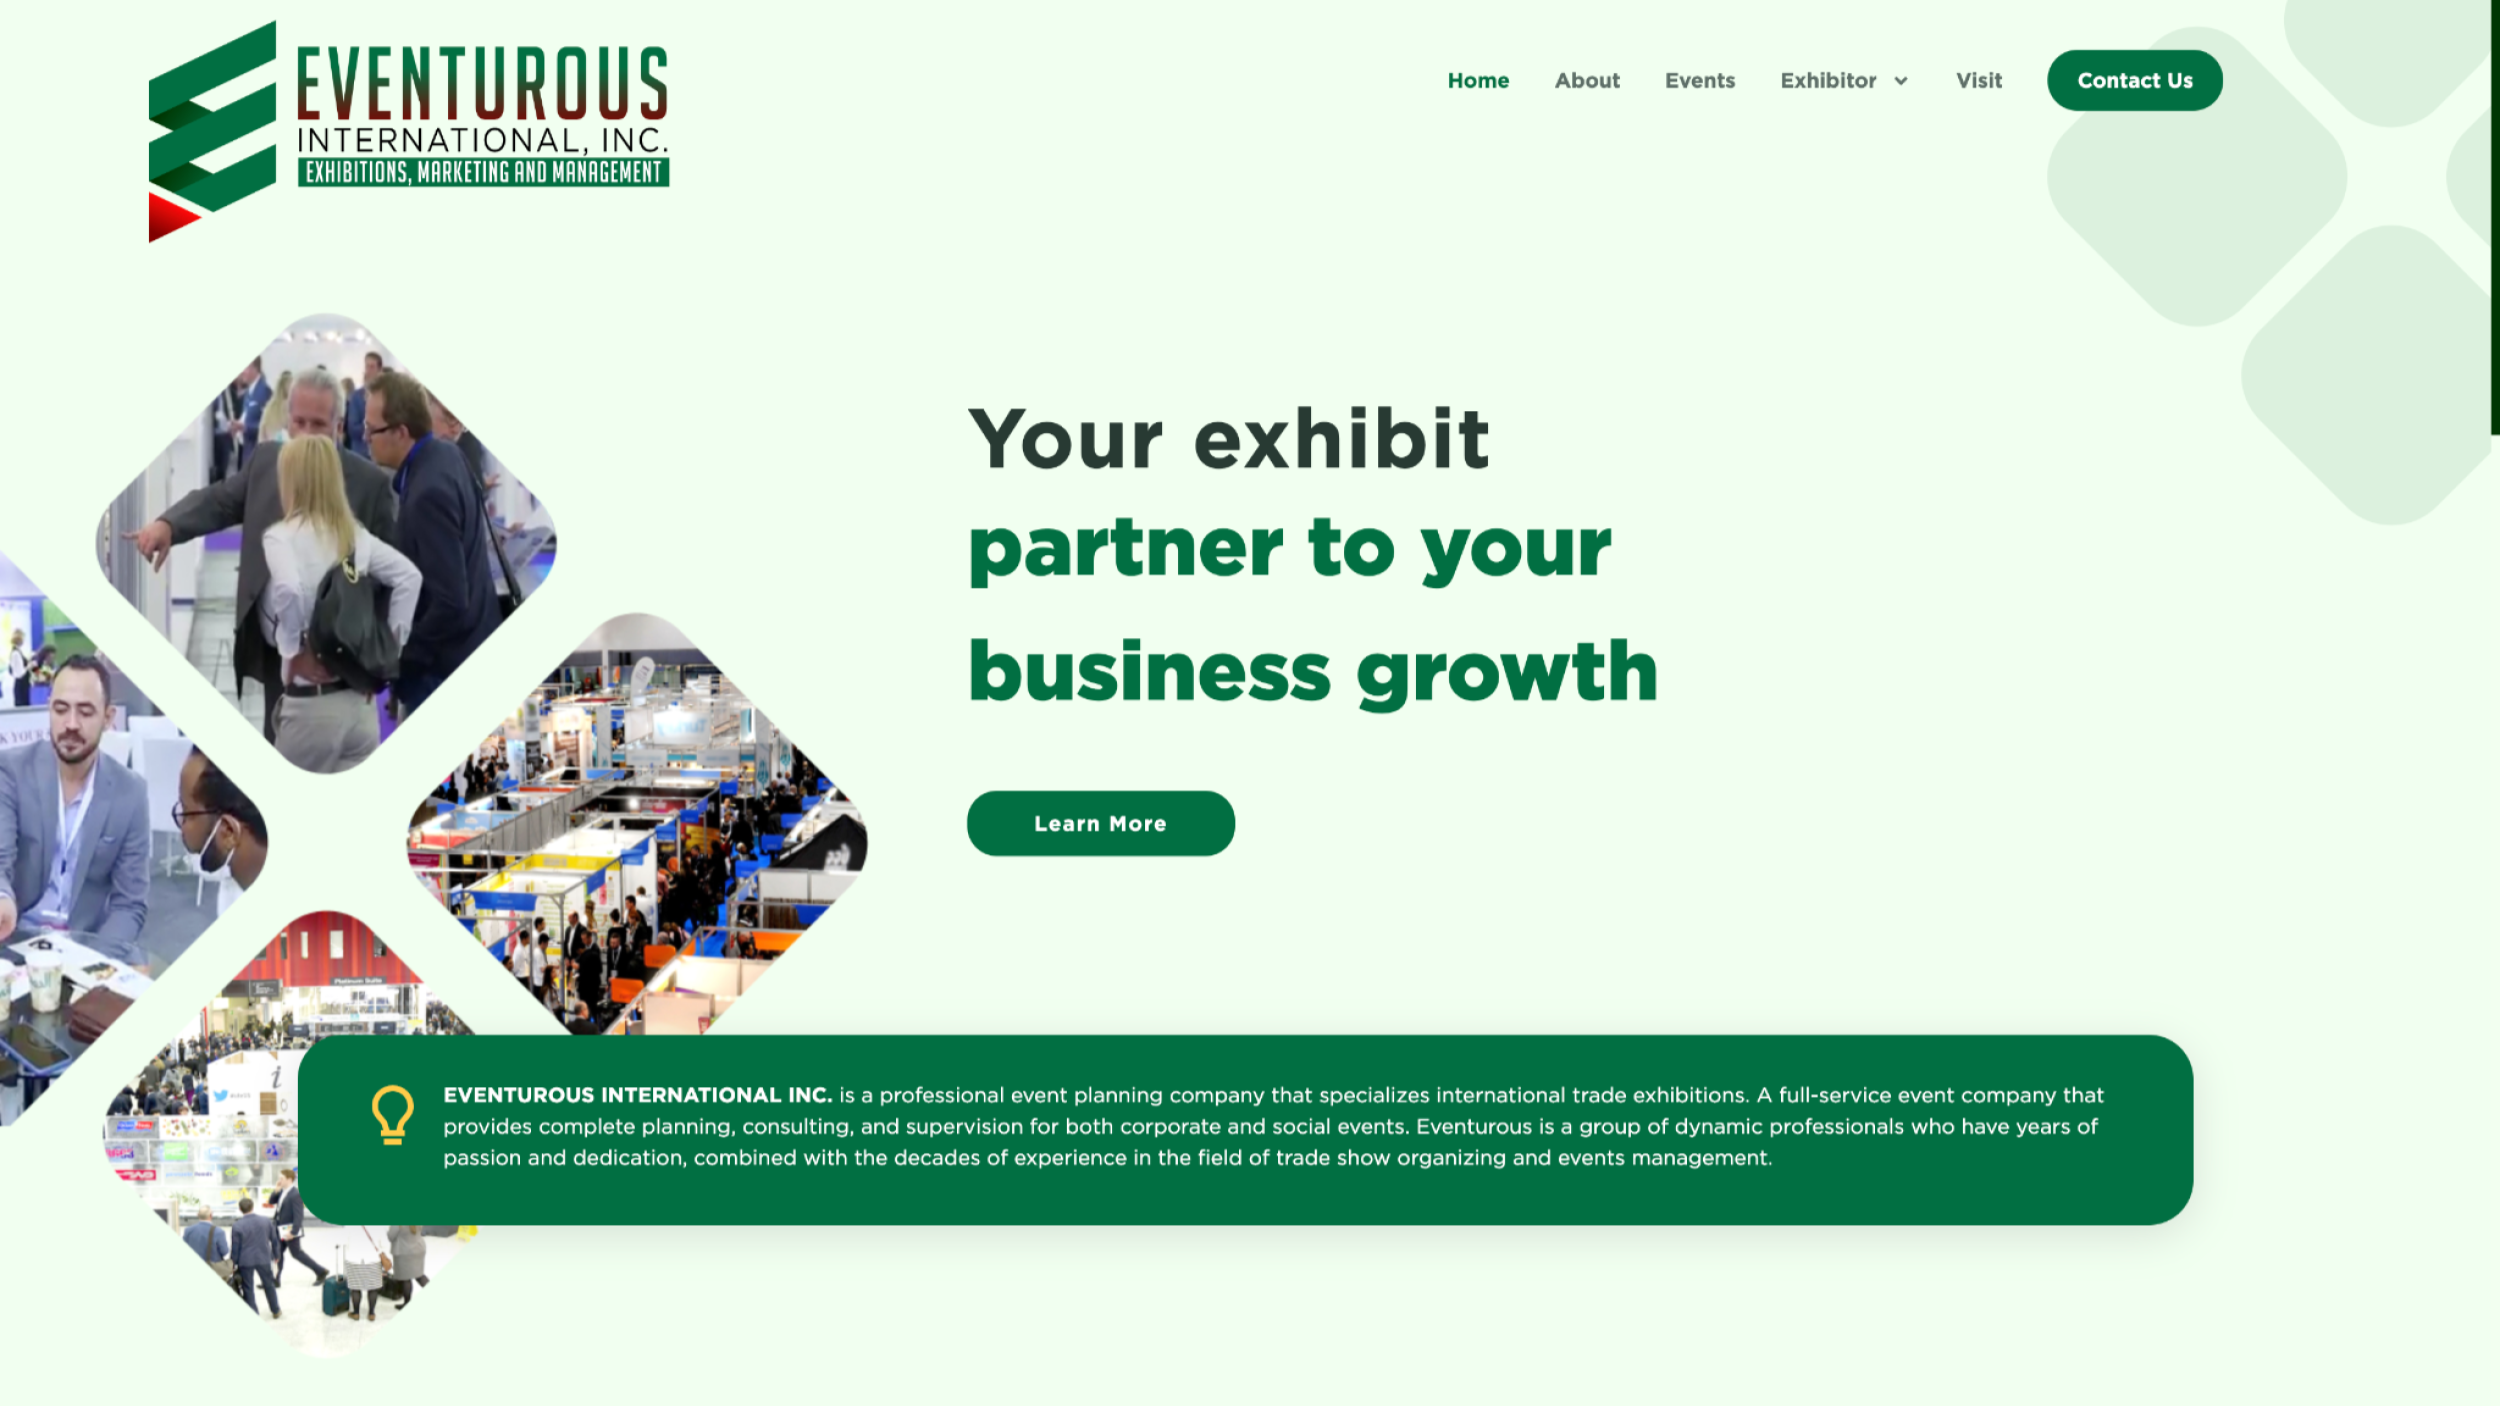 Your exhibit partner to your business growth